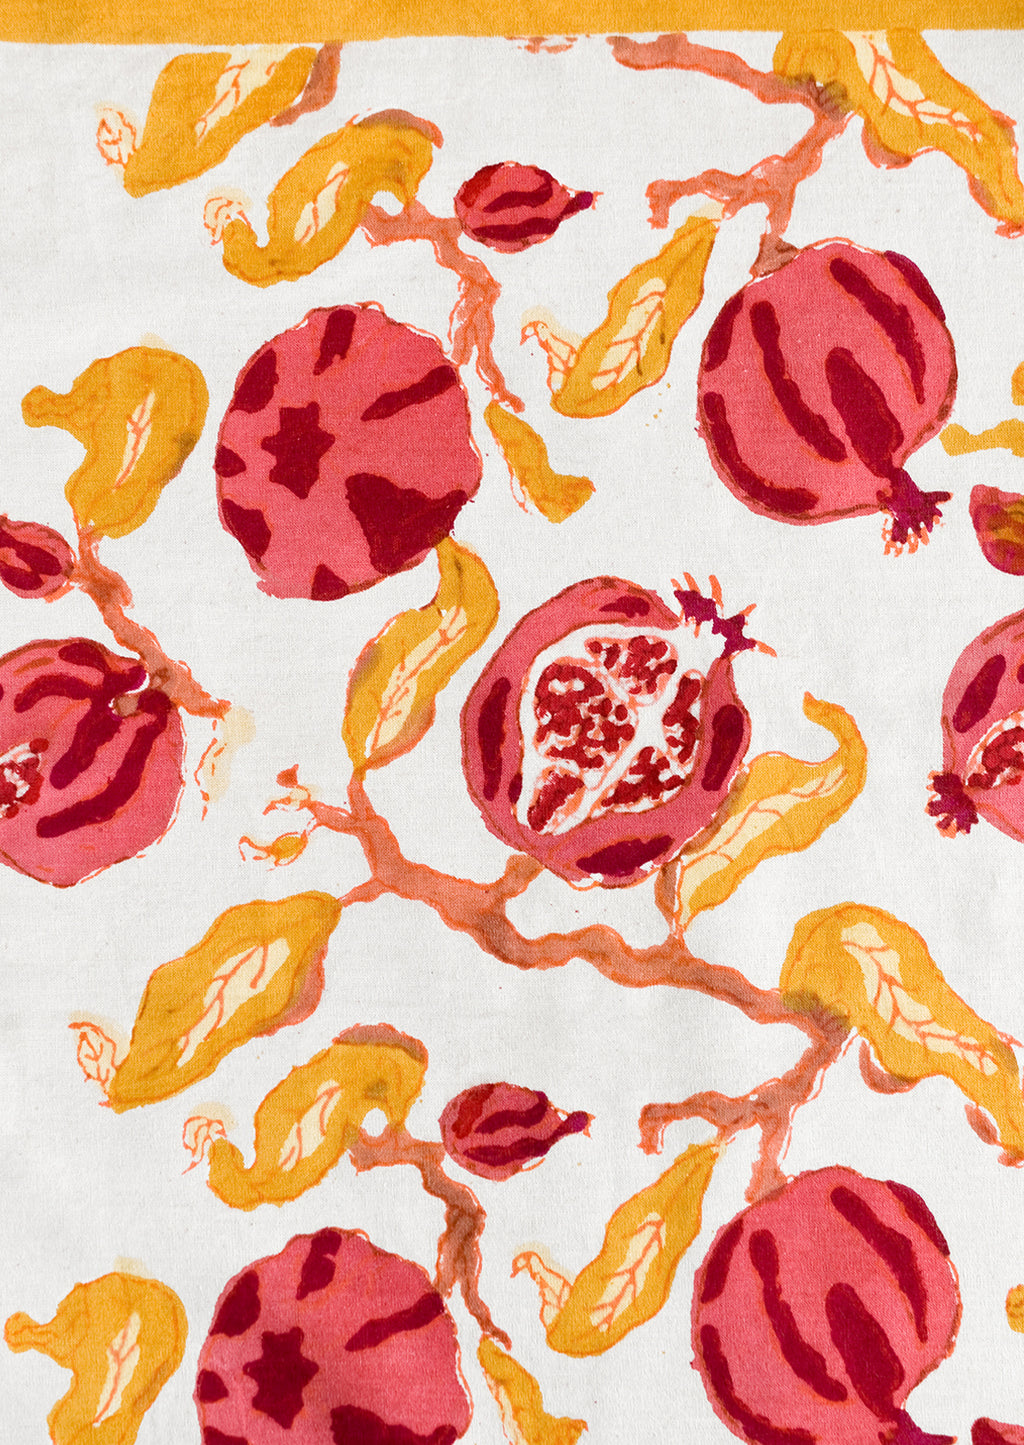 2: A block printed pomegranate pattern in red, pink and yellow.